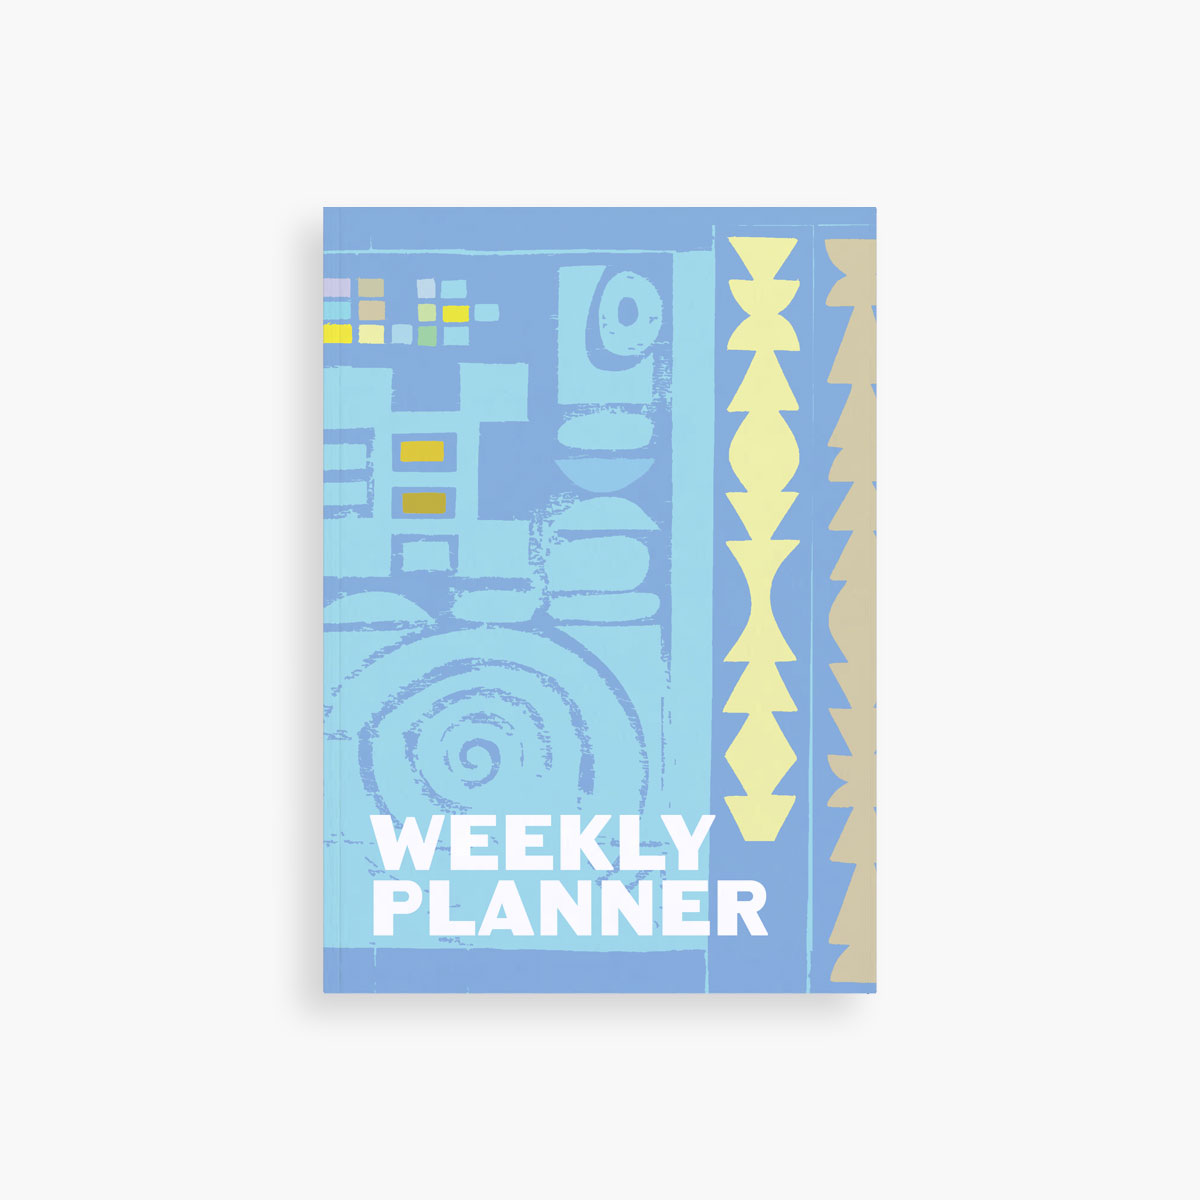 Undated Weekly Planner – blue contemporary African art